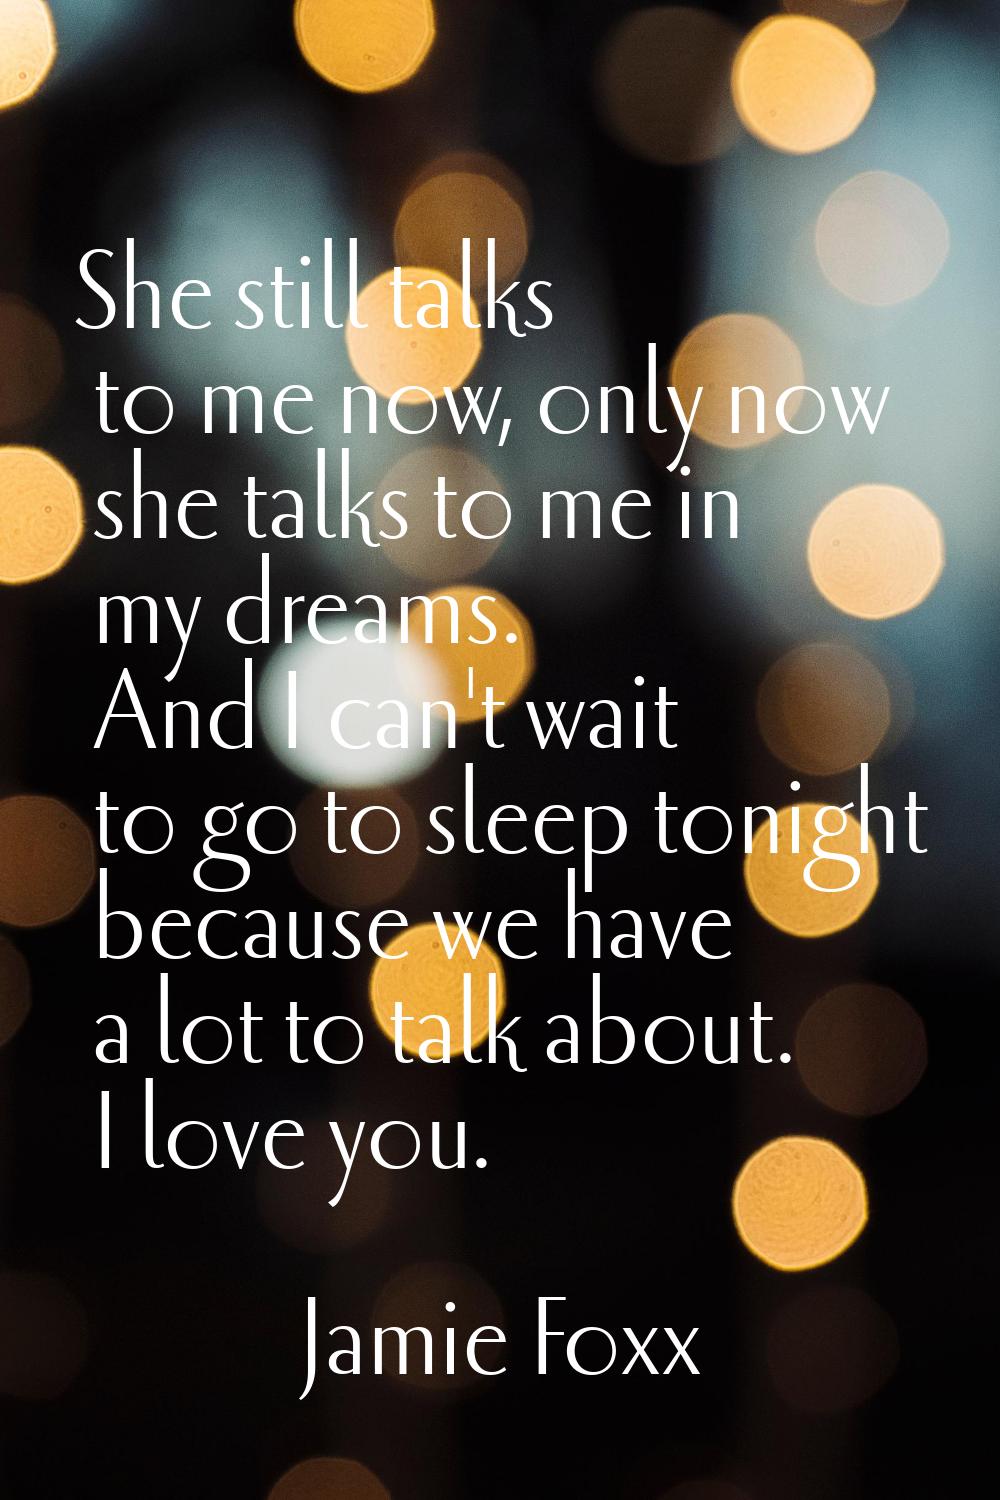 She still talks to me now, only now she talks to me in my dreams. And I can't wait to go to sleep t